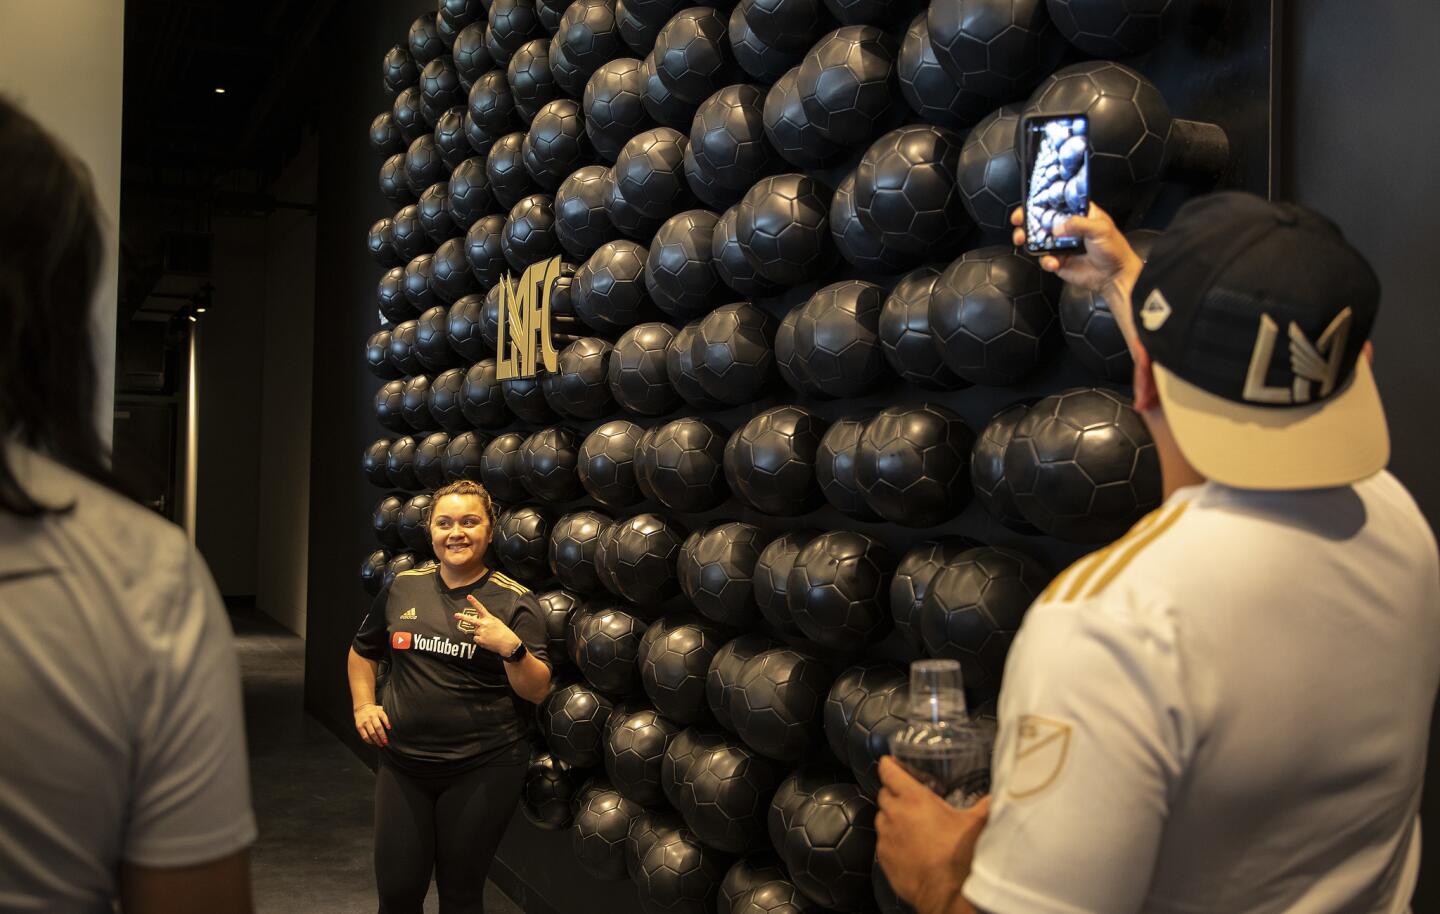 LAFC fans take selfies against a wall of soccer balls at the Figueroa Club inside the new Banc of California Stadium on April 21.